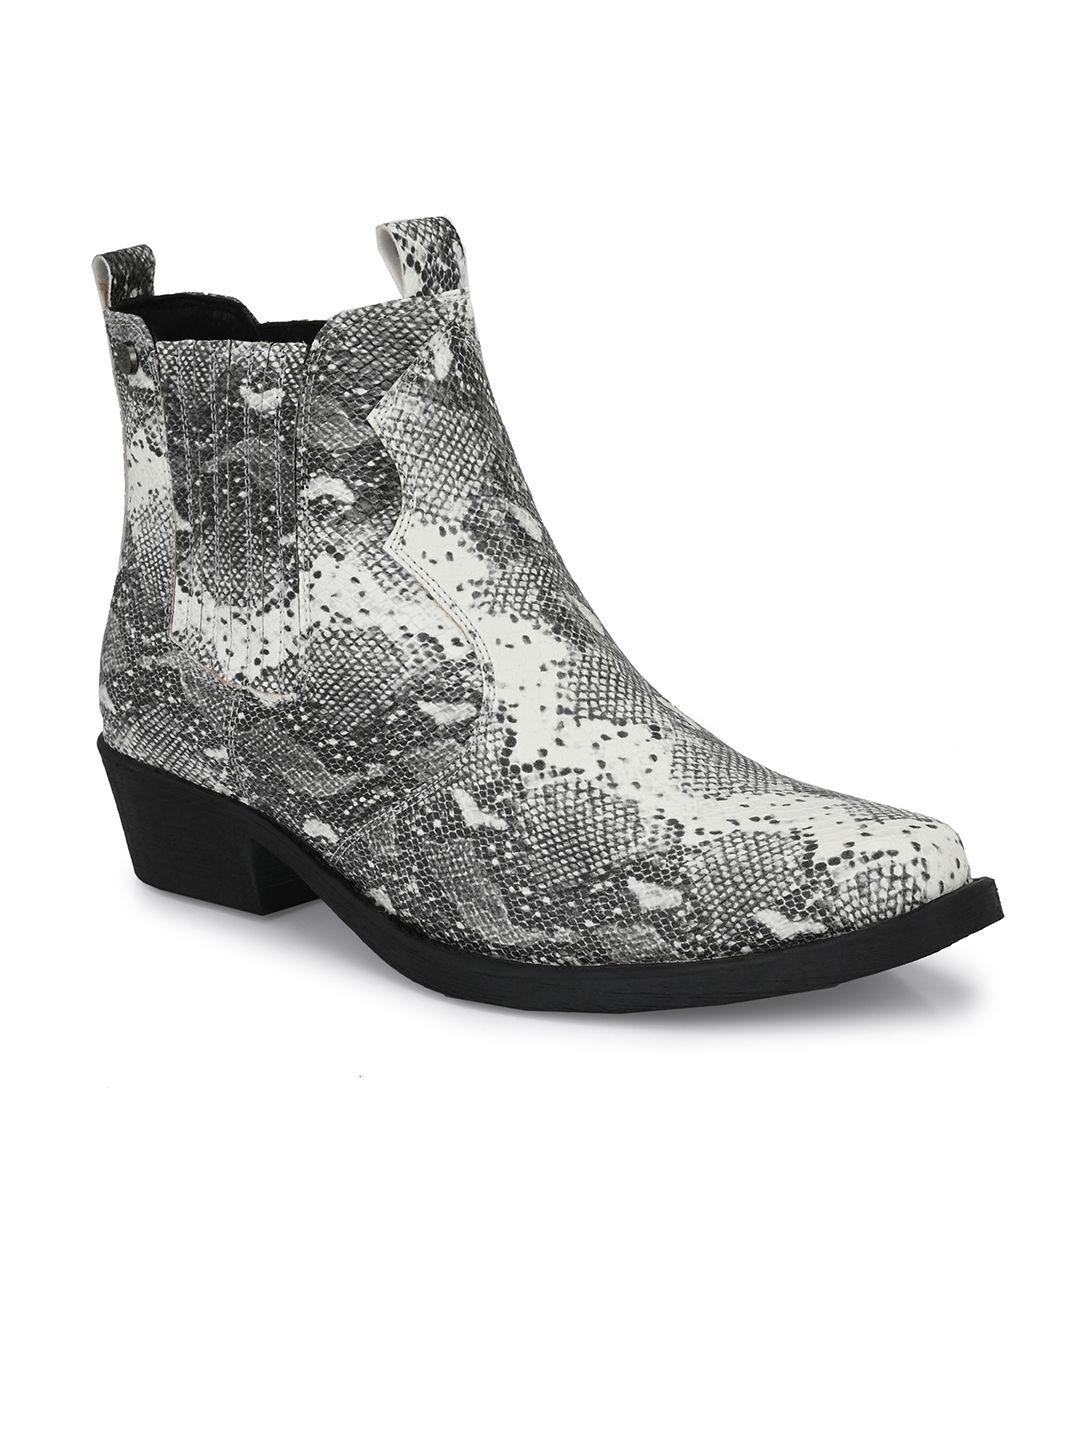 delize men off-white snakeskin textured high-top flat boots